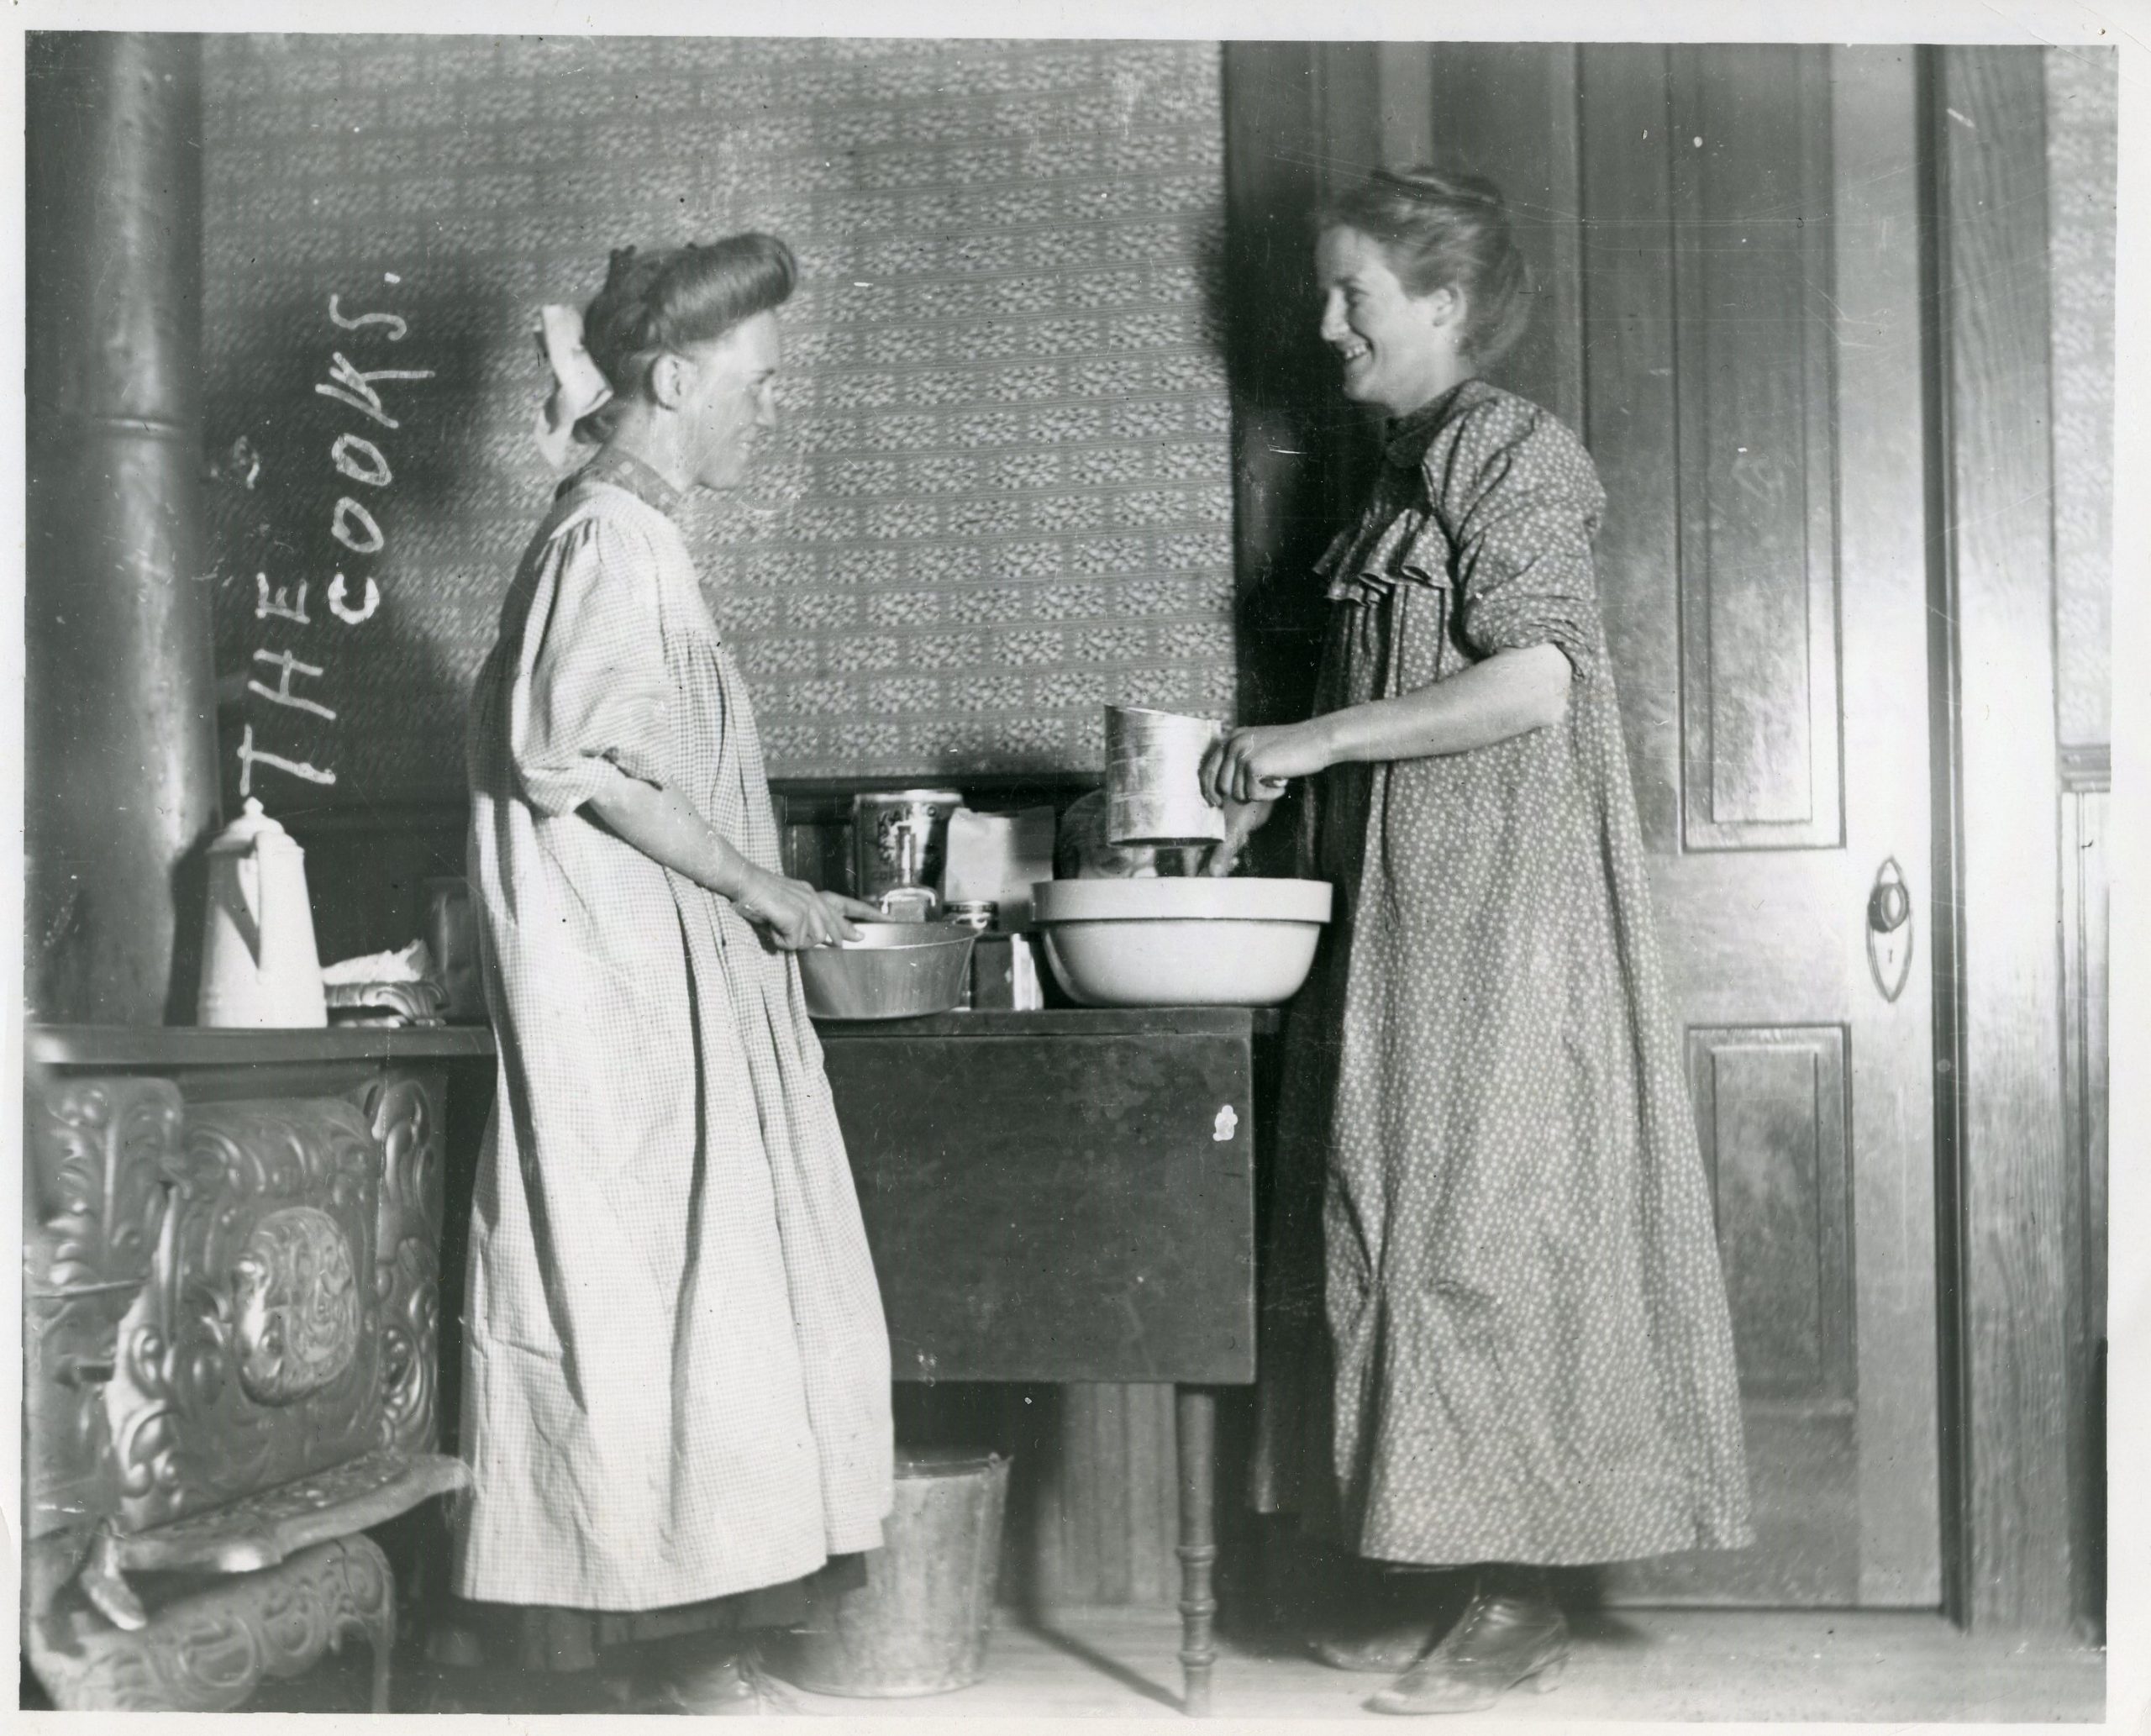 Women baking in kitchen. Courtesy of Adams County Historical Society.